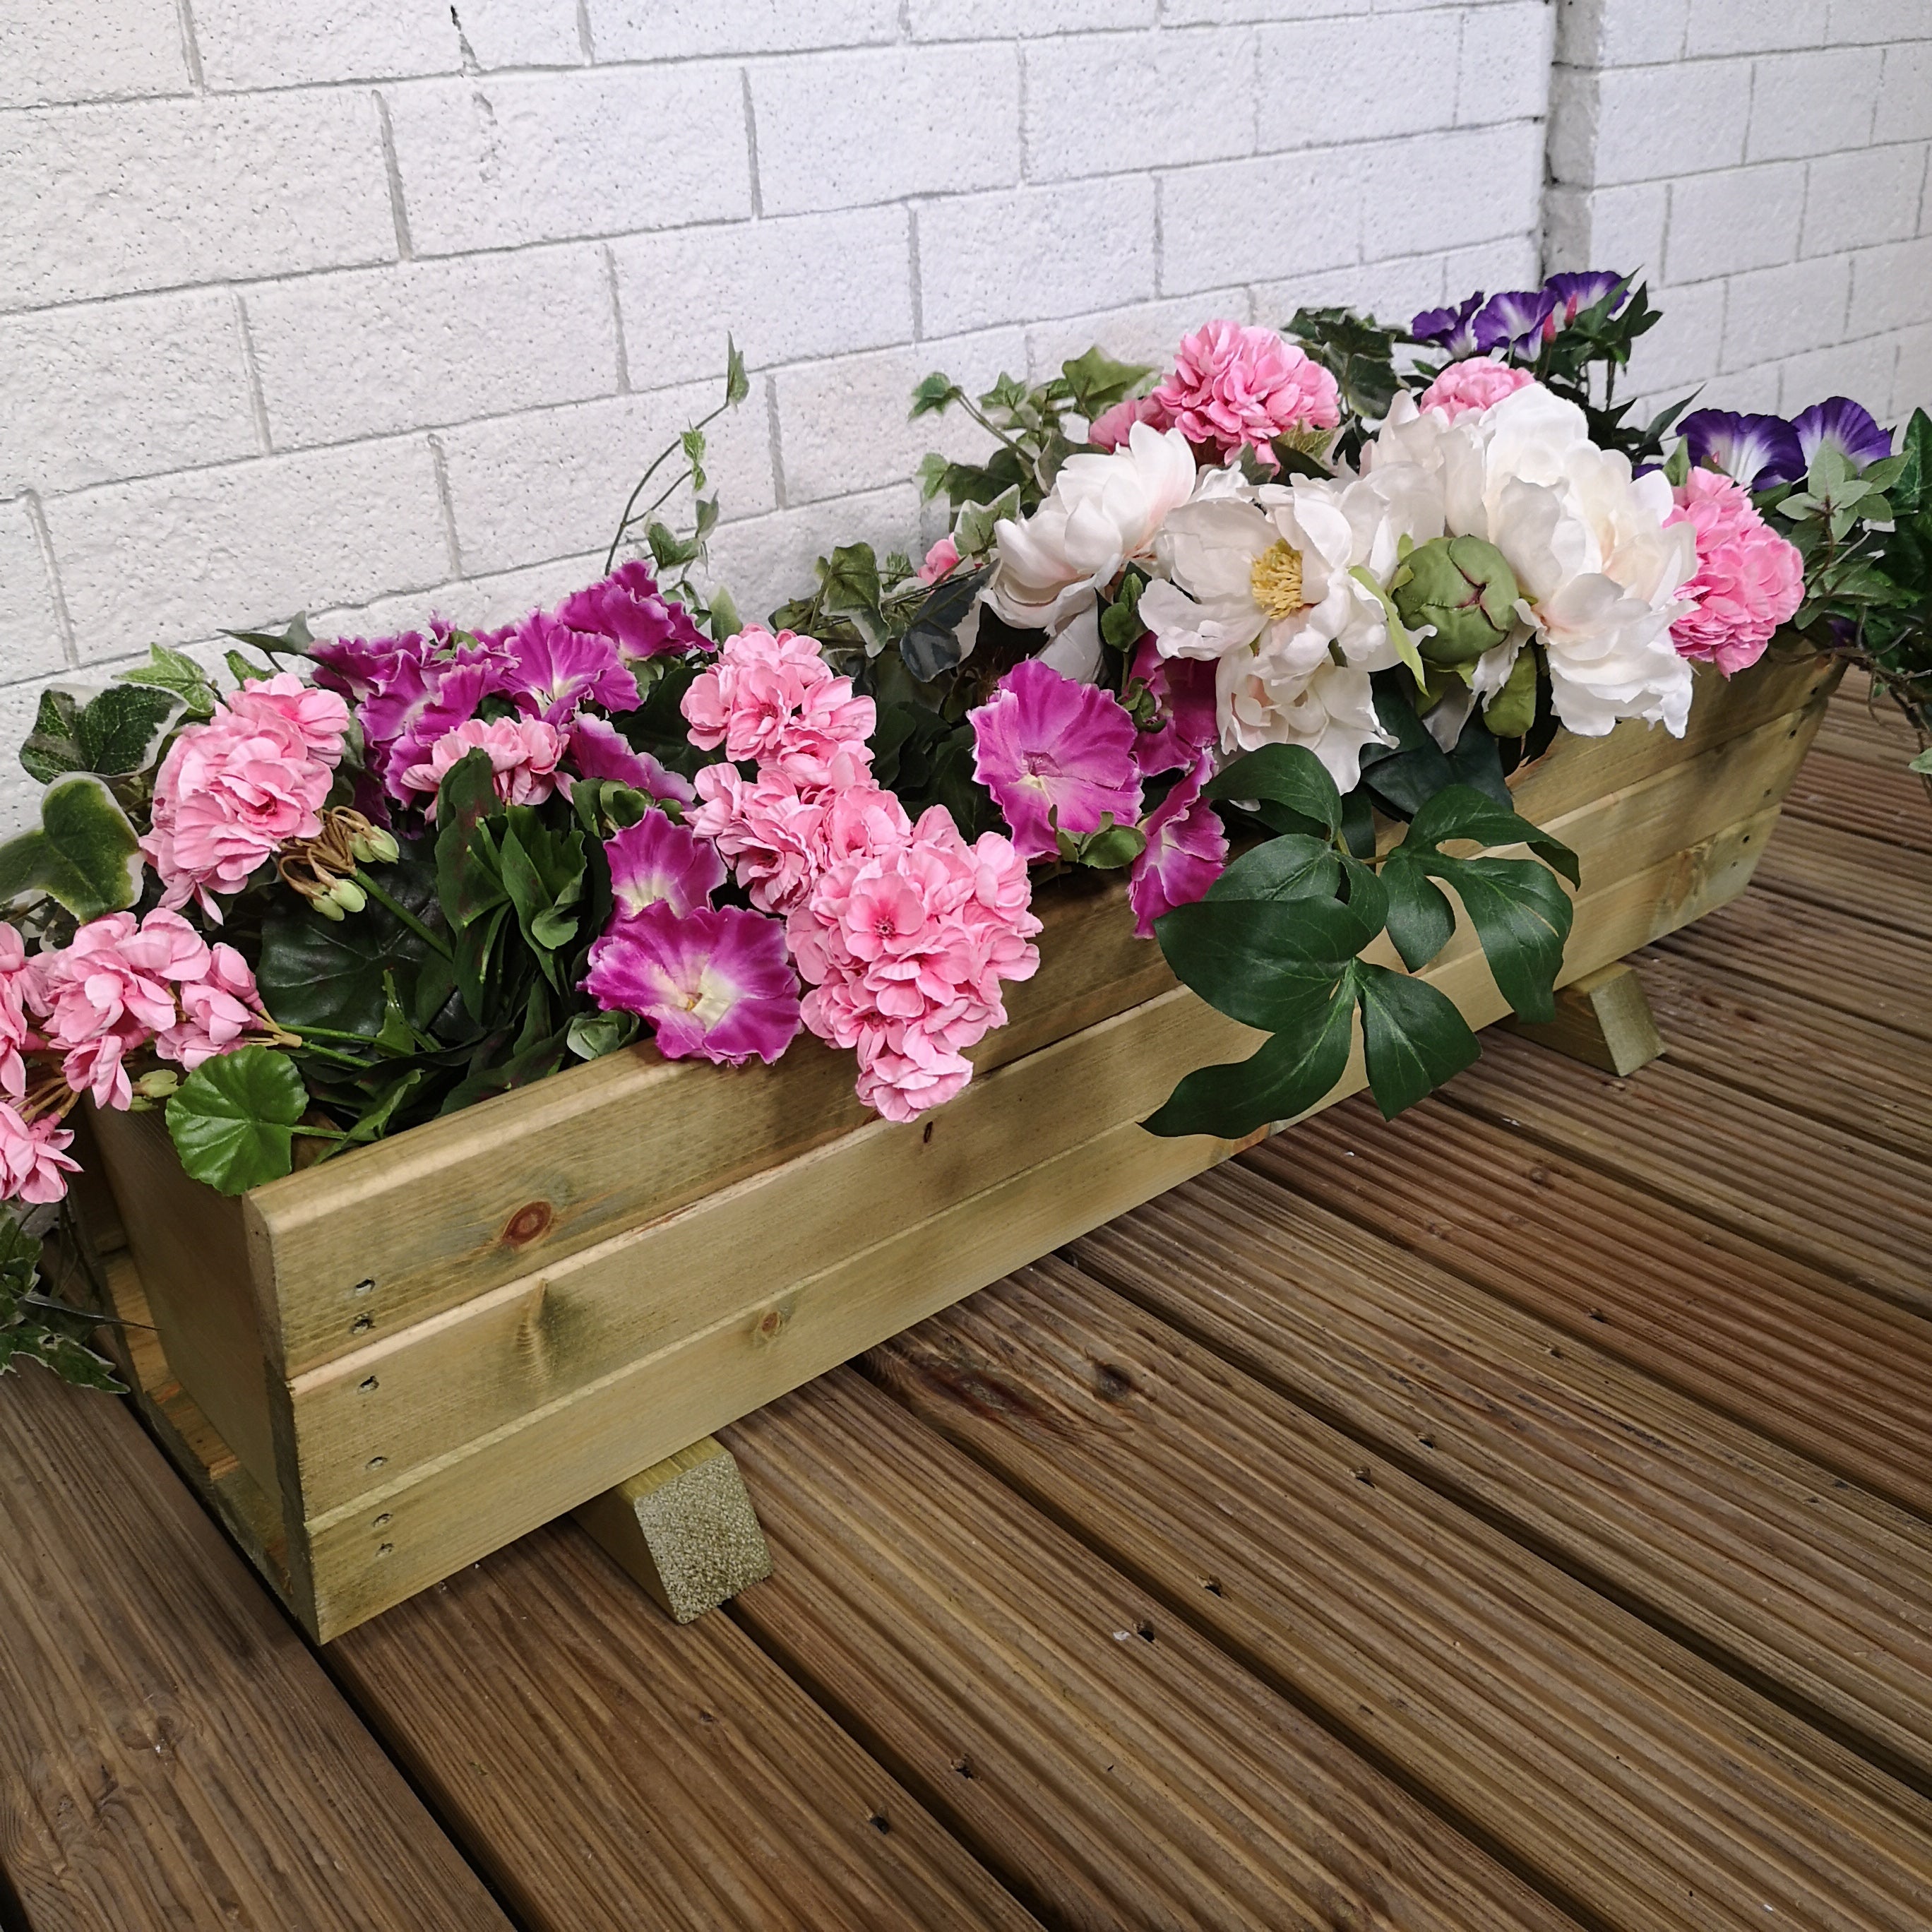 Tom Chambers Hand Made 87cm x 28cm Country Rustic Wooden Medium Garden Trough Flower Bed Planter